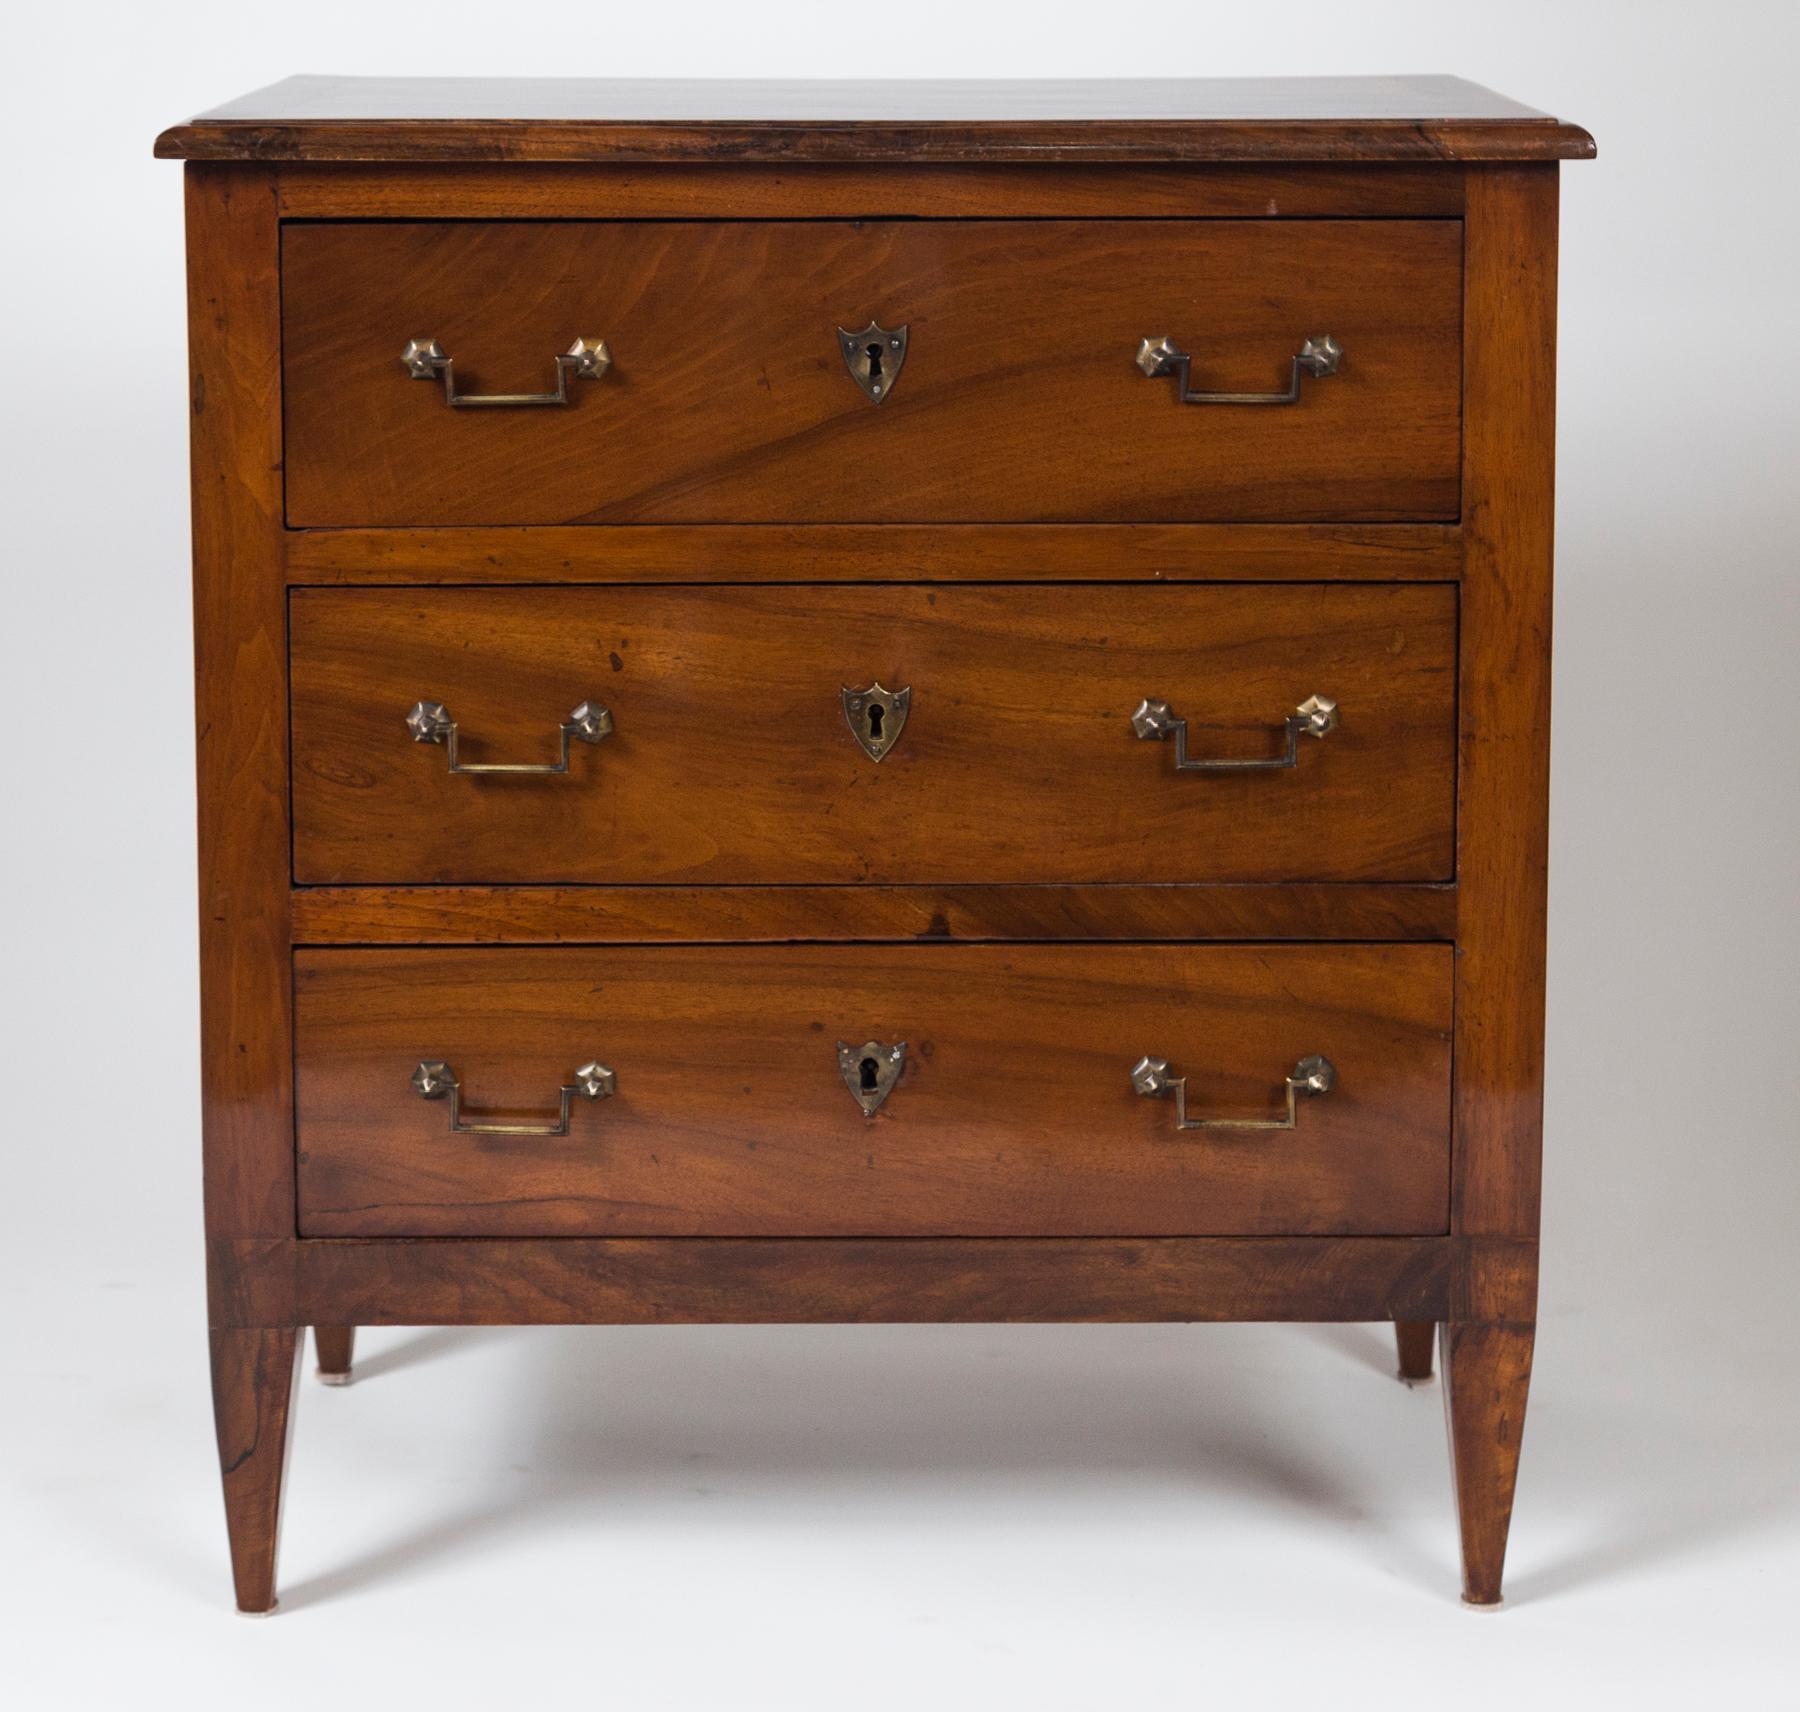 A beautiful pair of Directoire chests in solid walnut and comprised of three drawers with brass angular handles and shield-shaped escutcheons, finishing on straight, squared and tapered legs.
Dating: 1810 circa
Origin: France.
Condition: